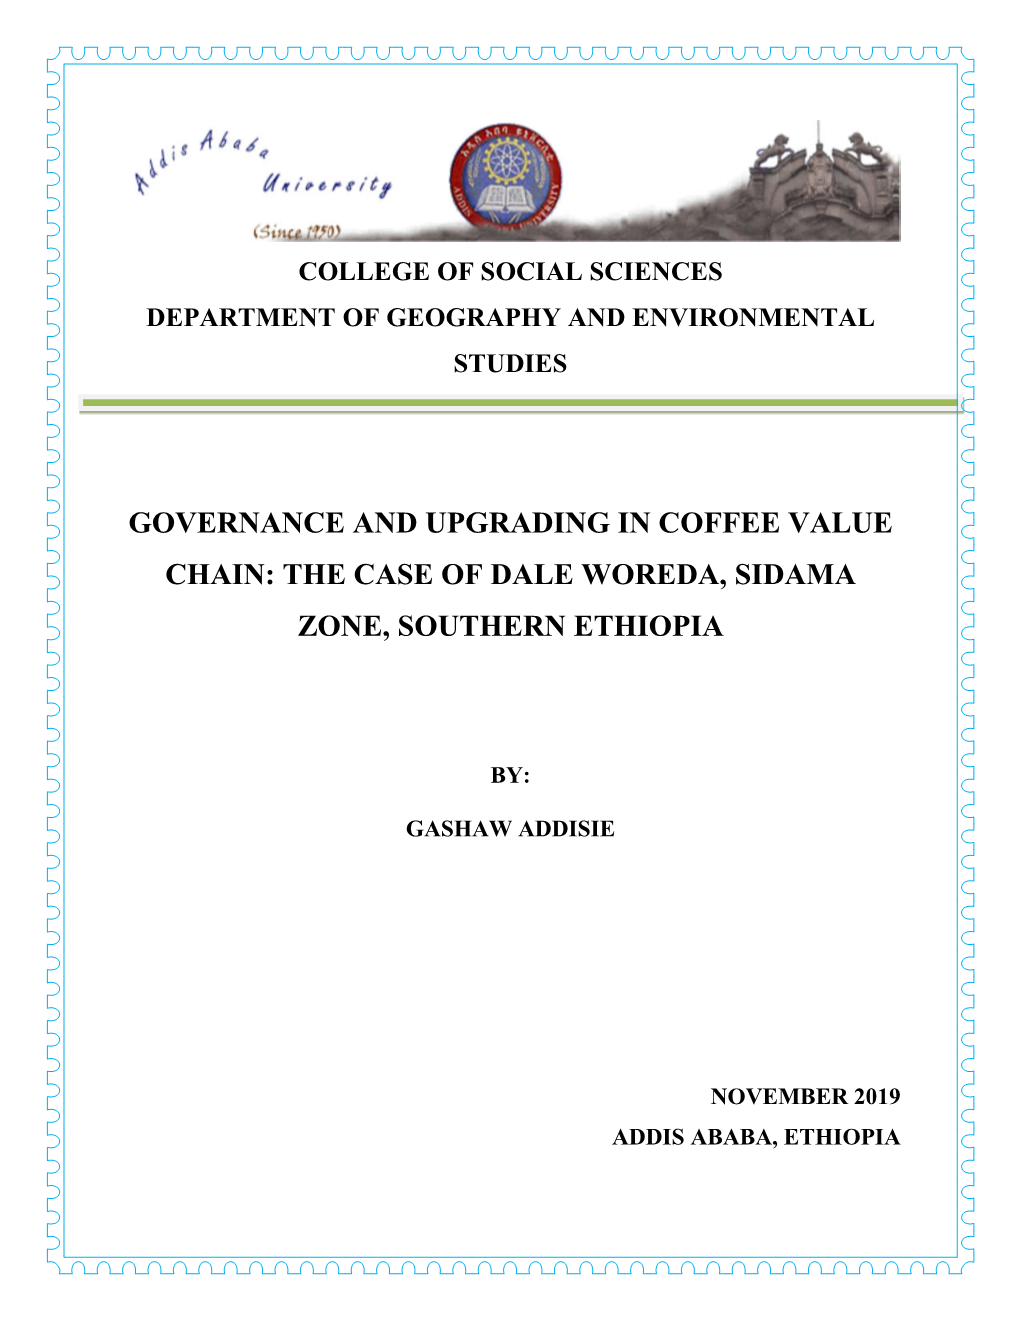 Governance and Upgrading in Coffee Value Chain: the Case of Dale Woreda, Sidama Zone, Southern Ethiopia